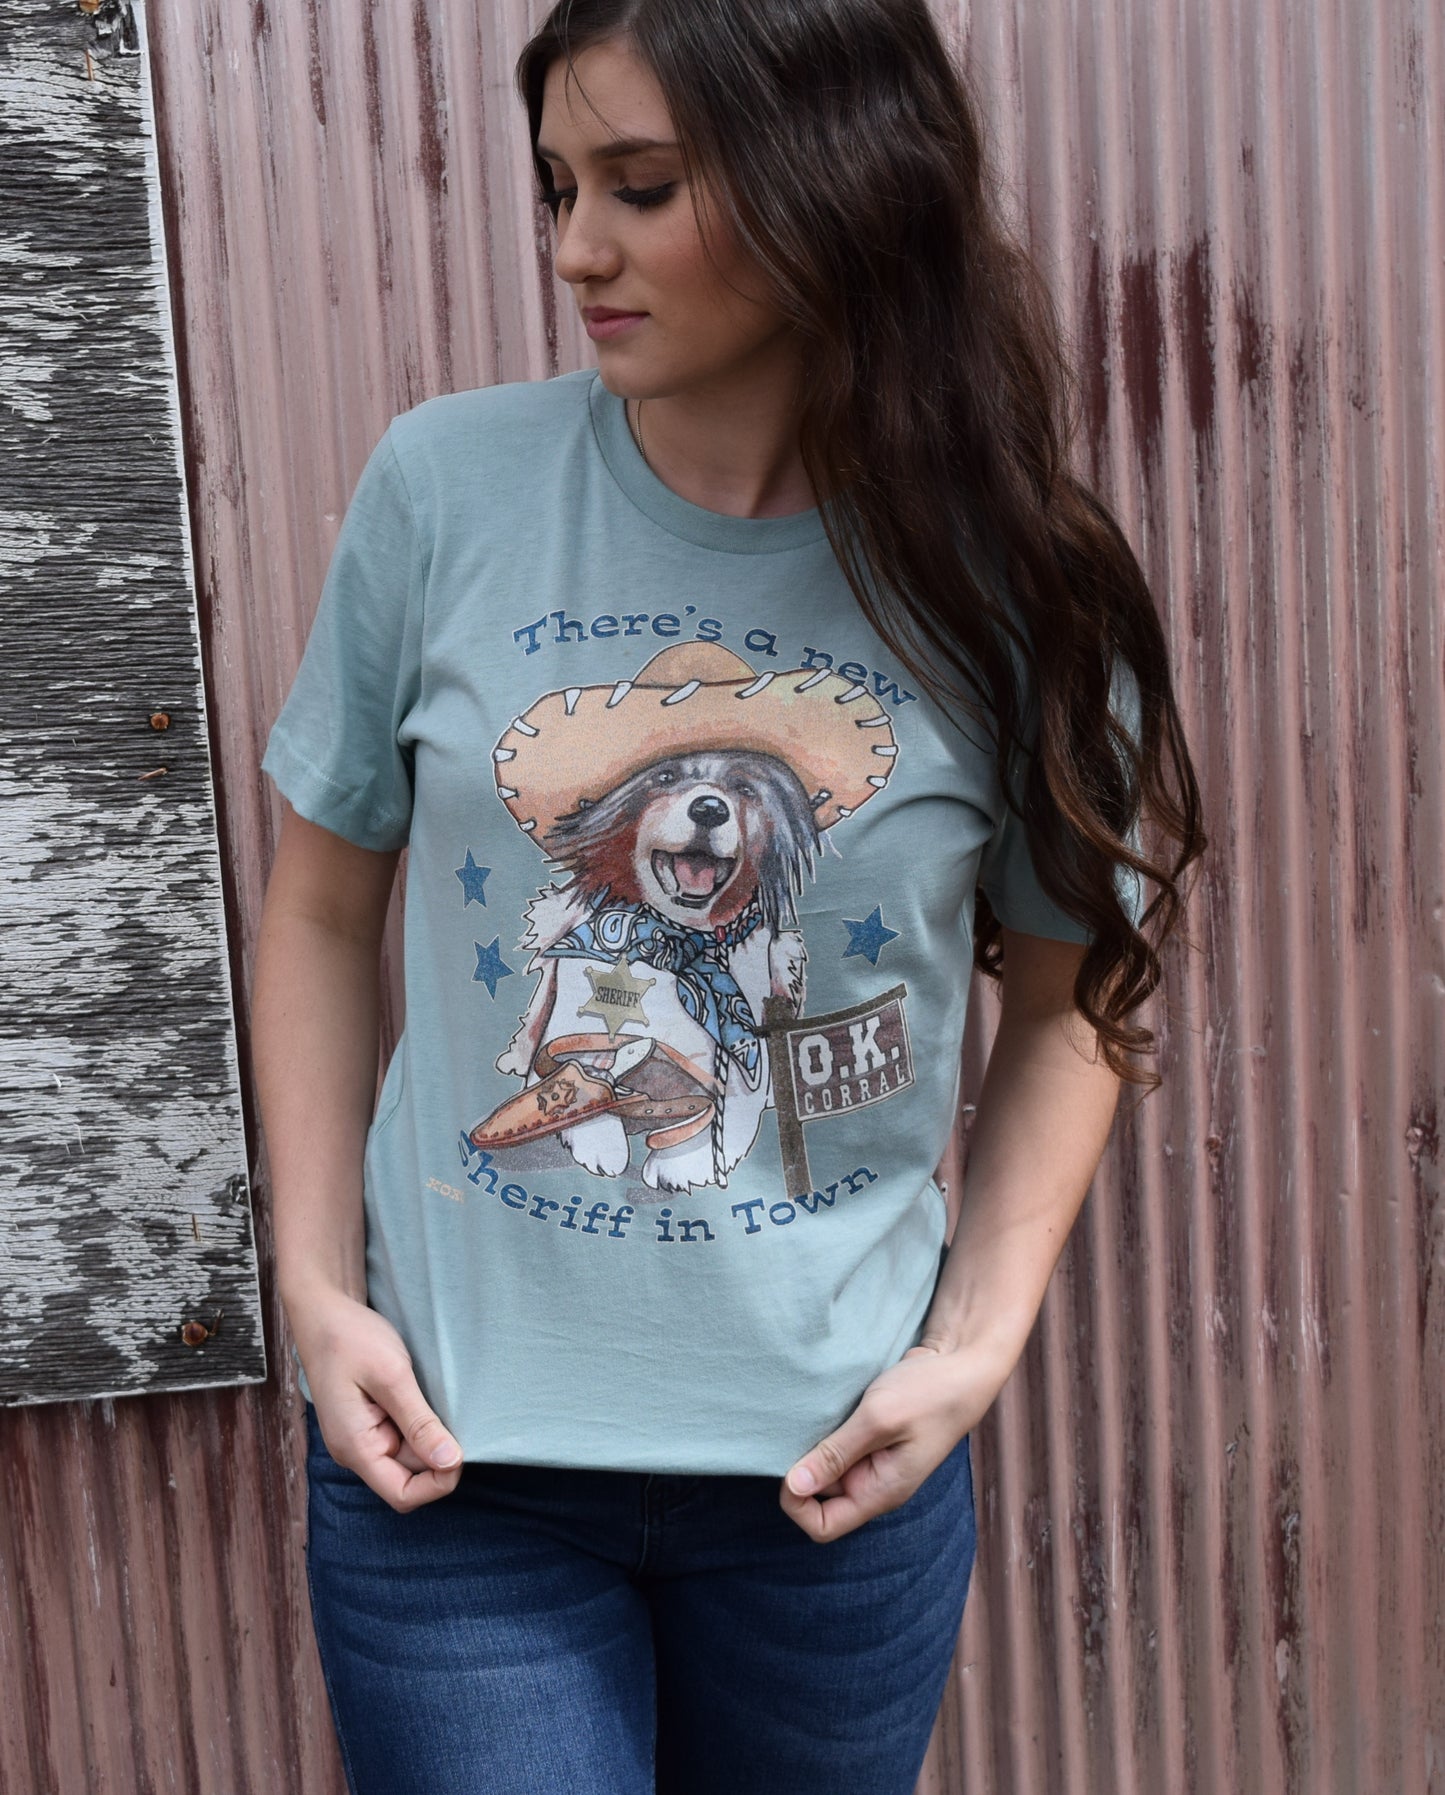 The New Sheriff in Town Graphic Tee